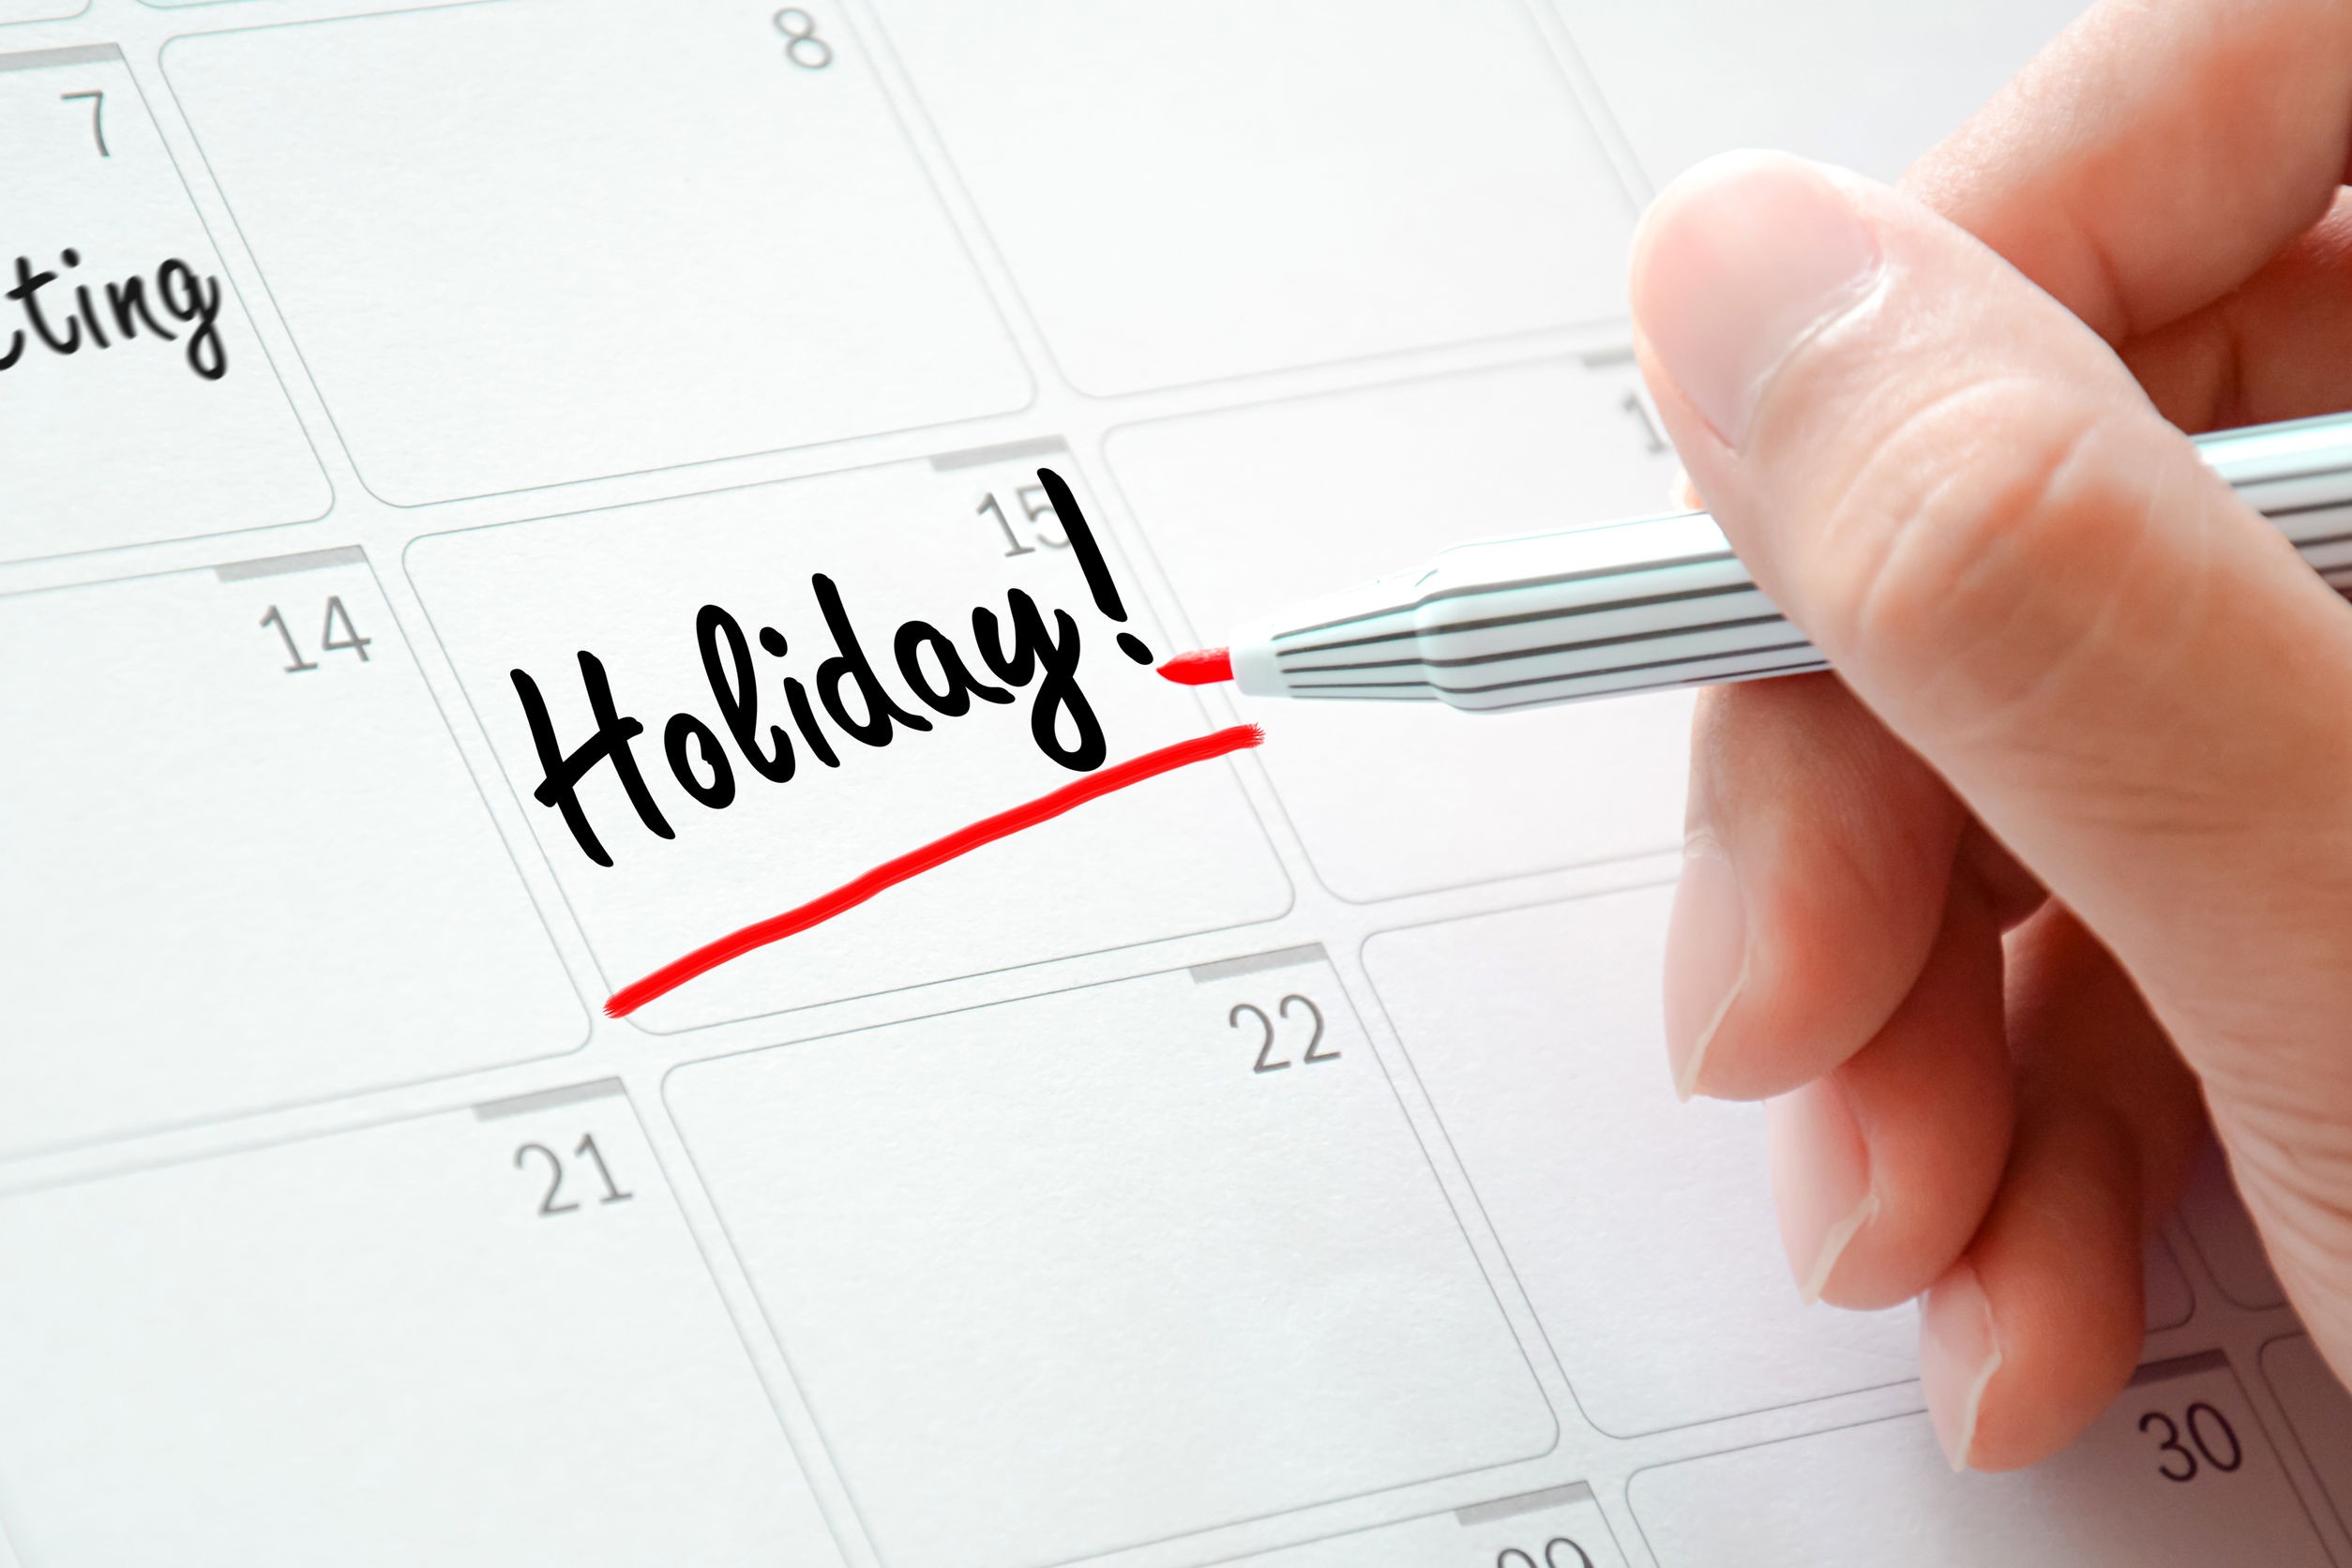 employees-to-get-three-holidays-in-week-new-labour-code-may-implemented-from-1st-oct